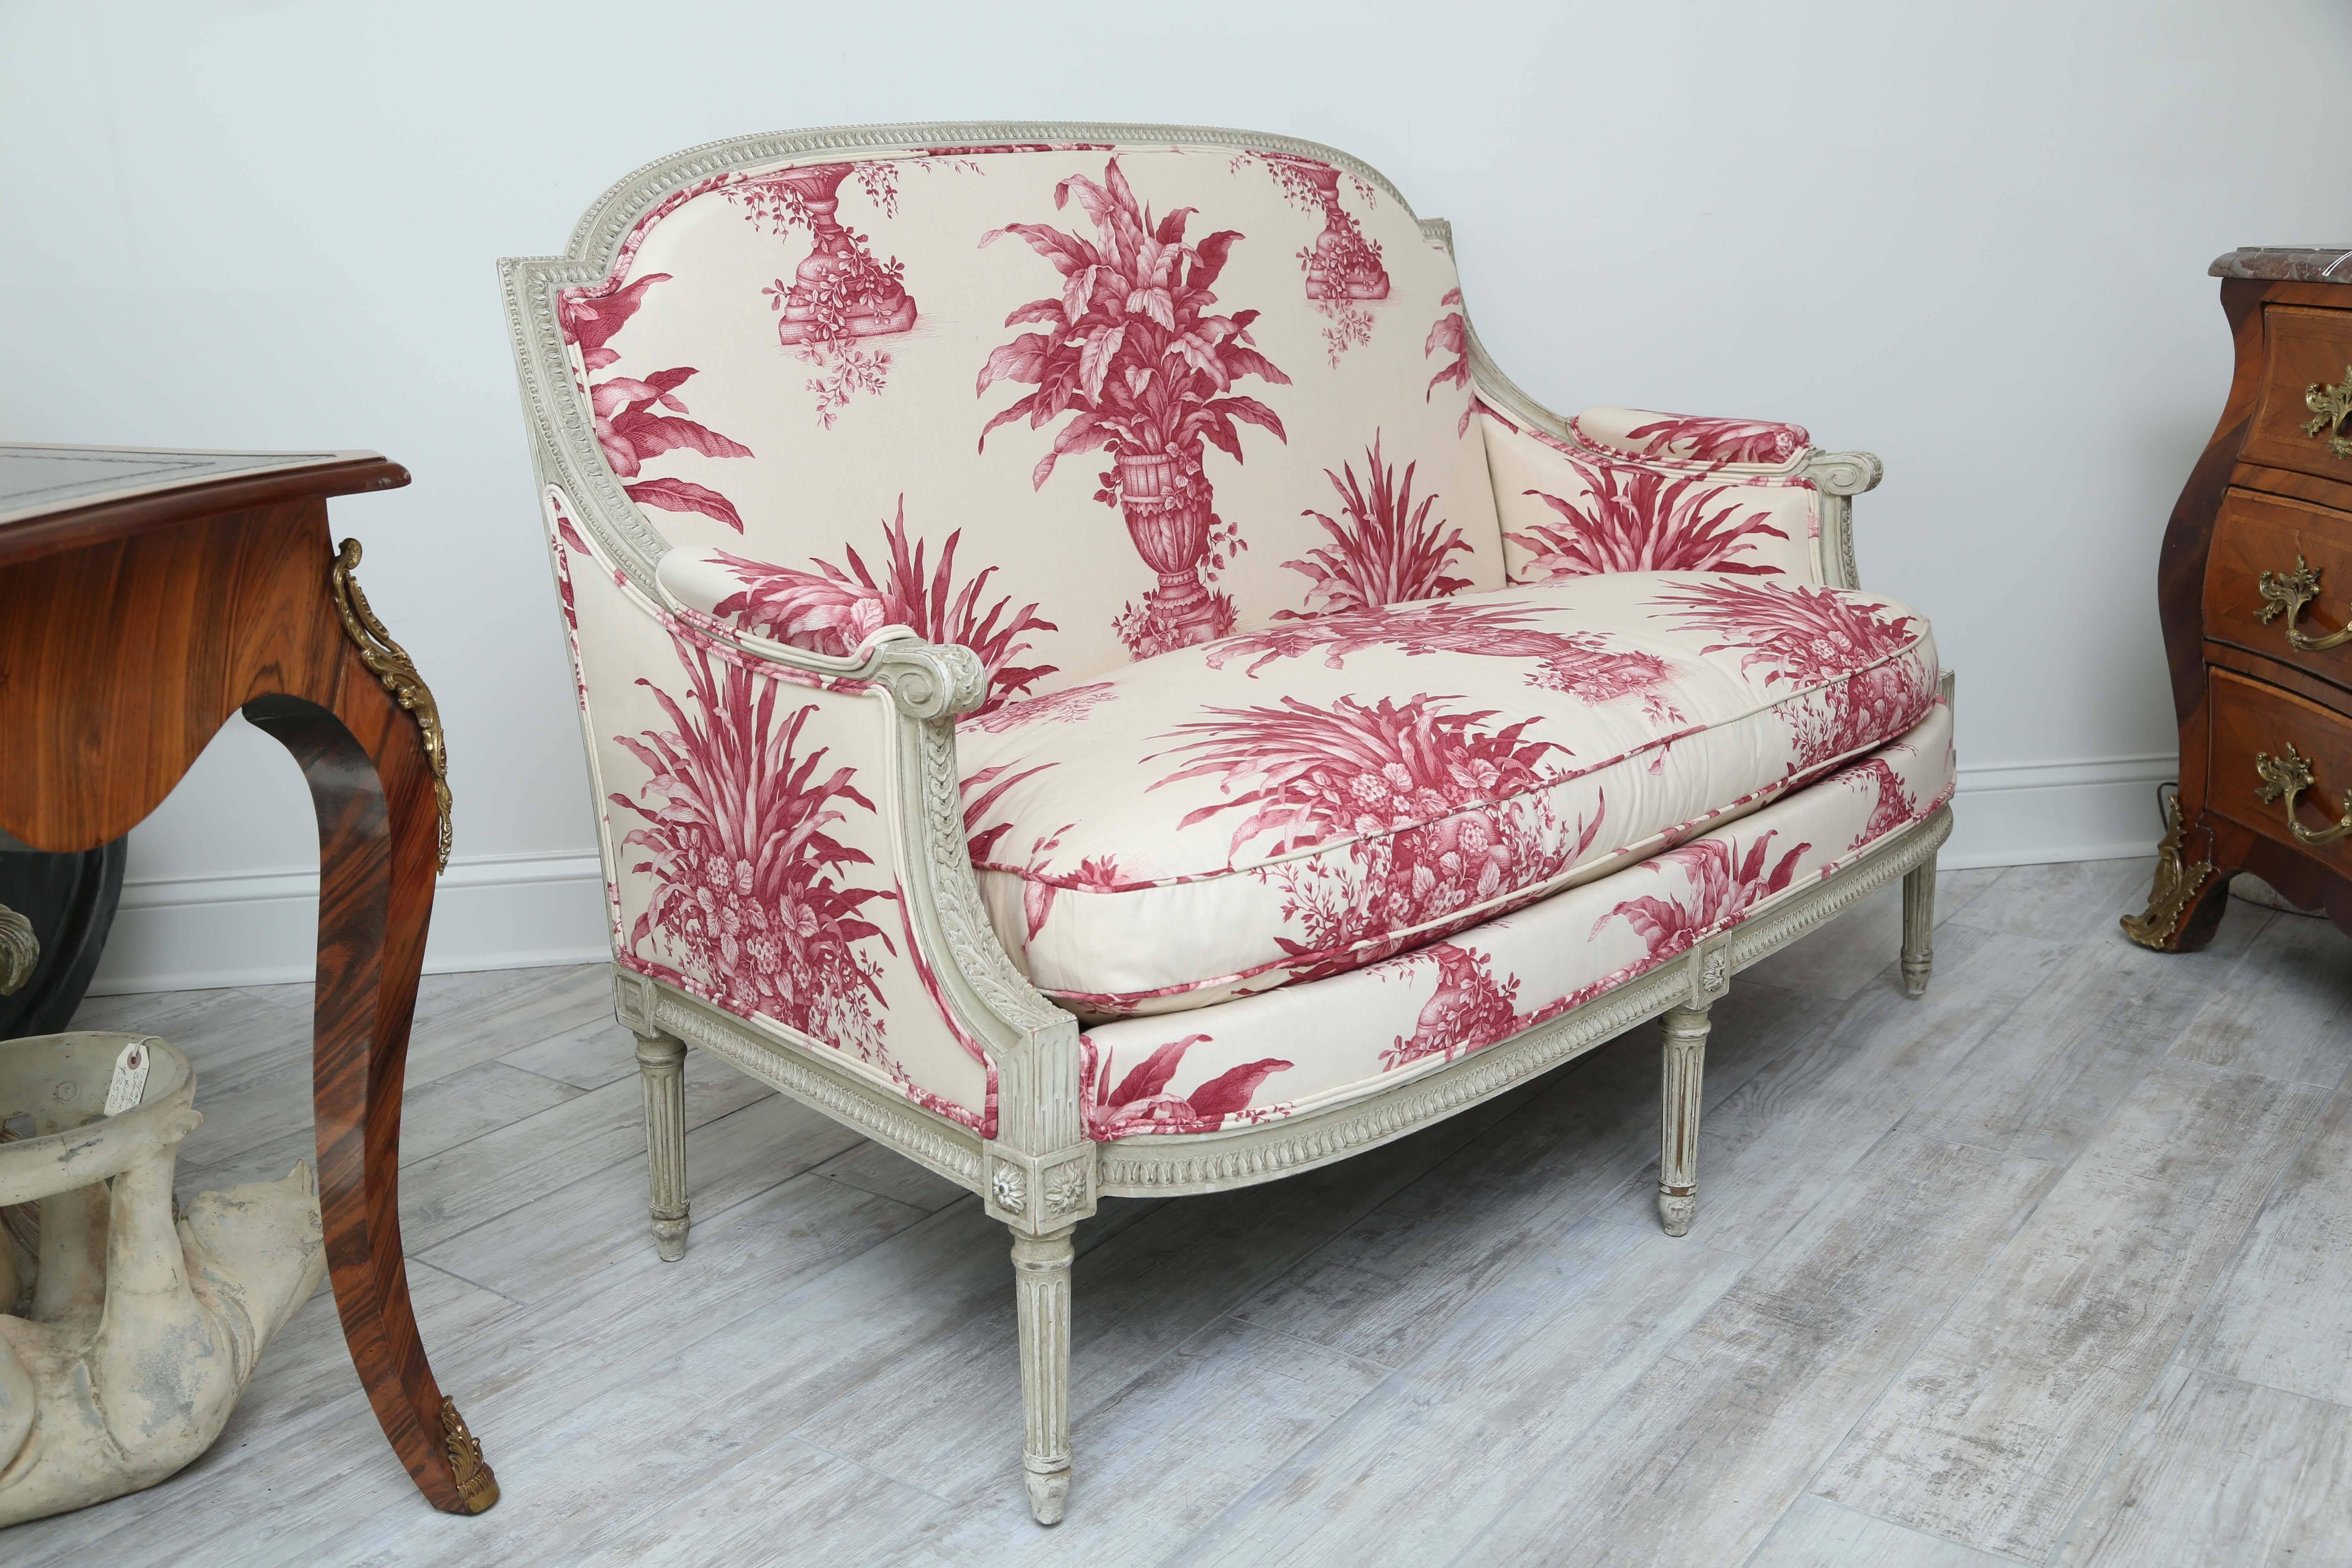 Stunning Louis XVI style loveseat newly upholstered in beautiful cream and cherry topiary fabric.